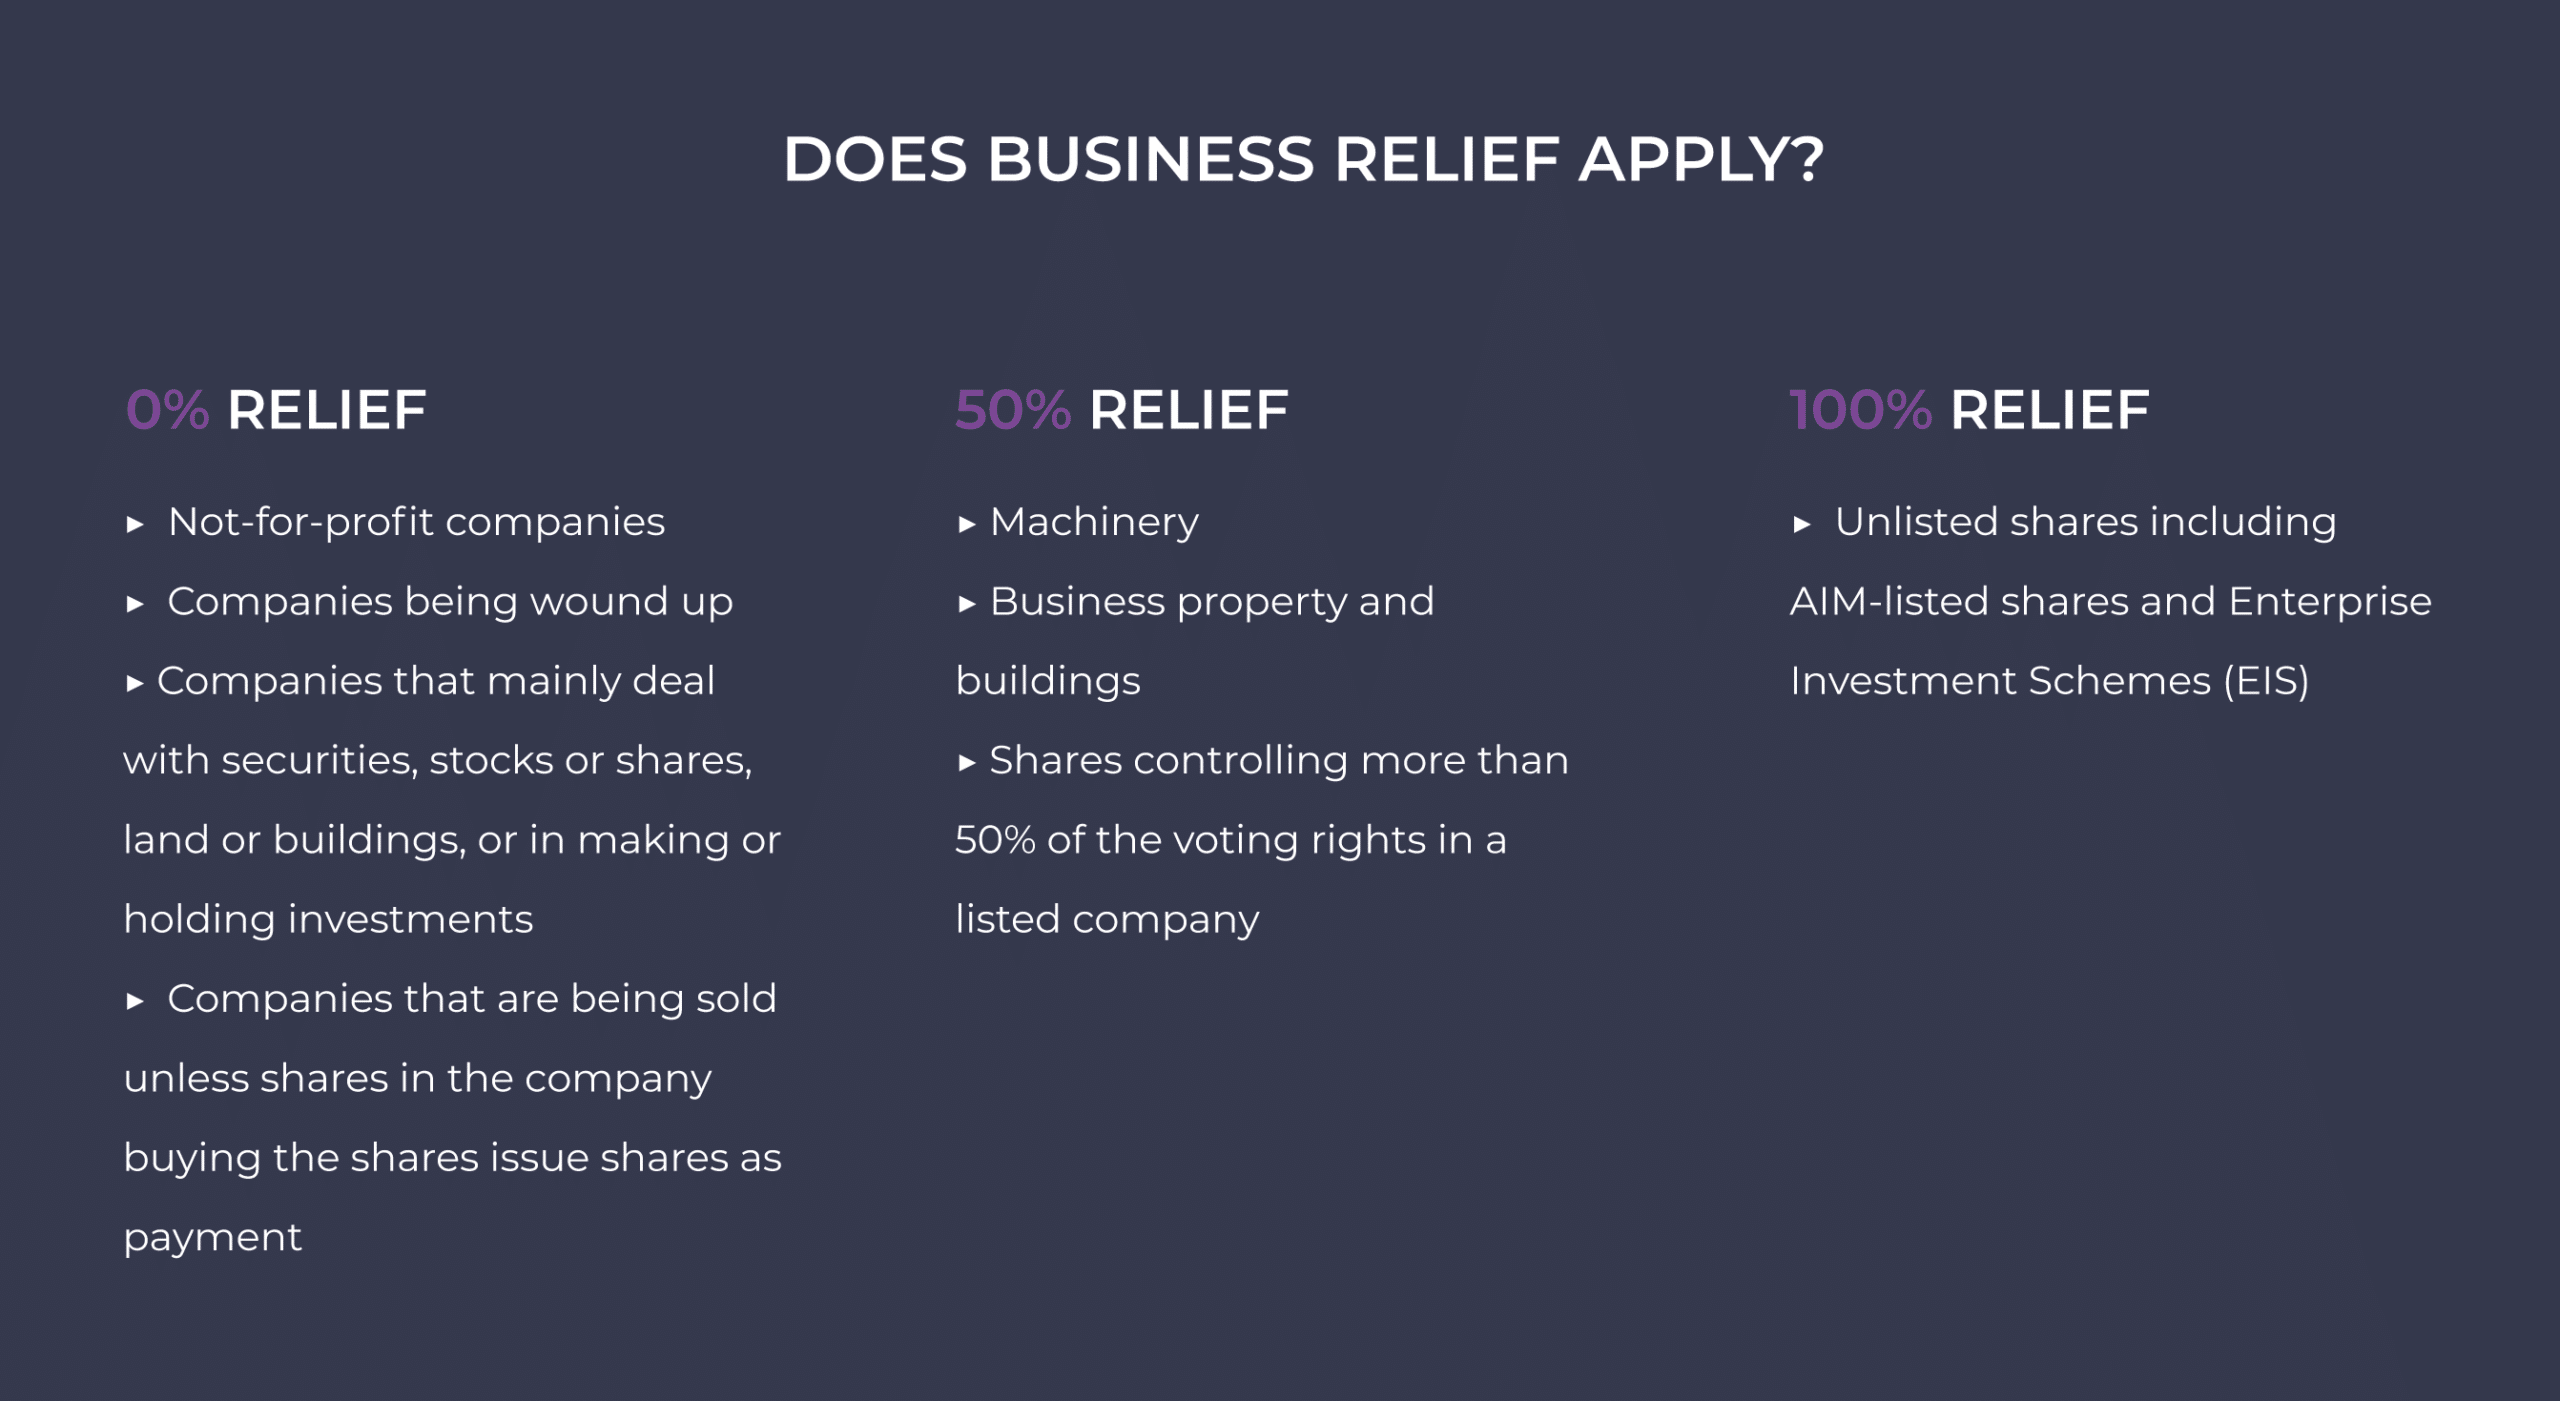 Does business relief apply